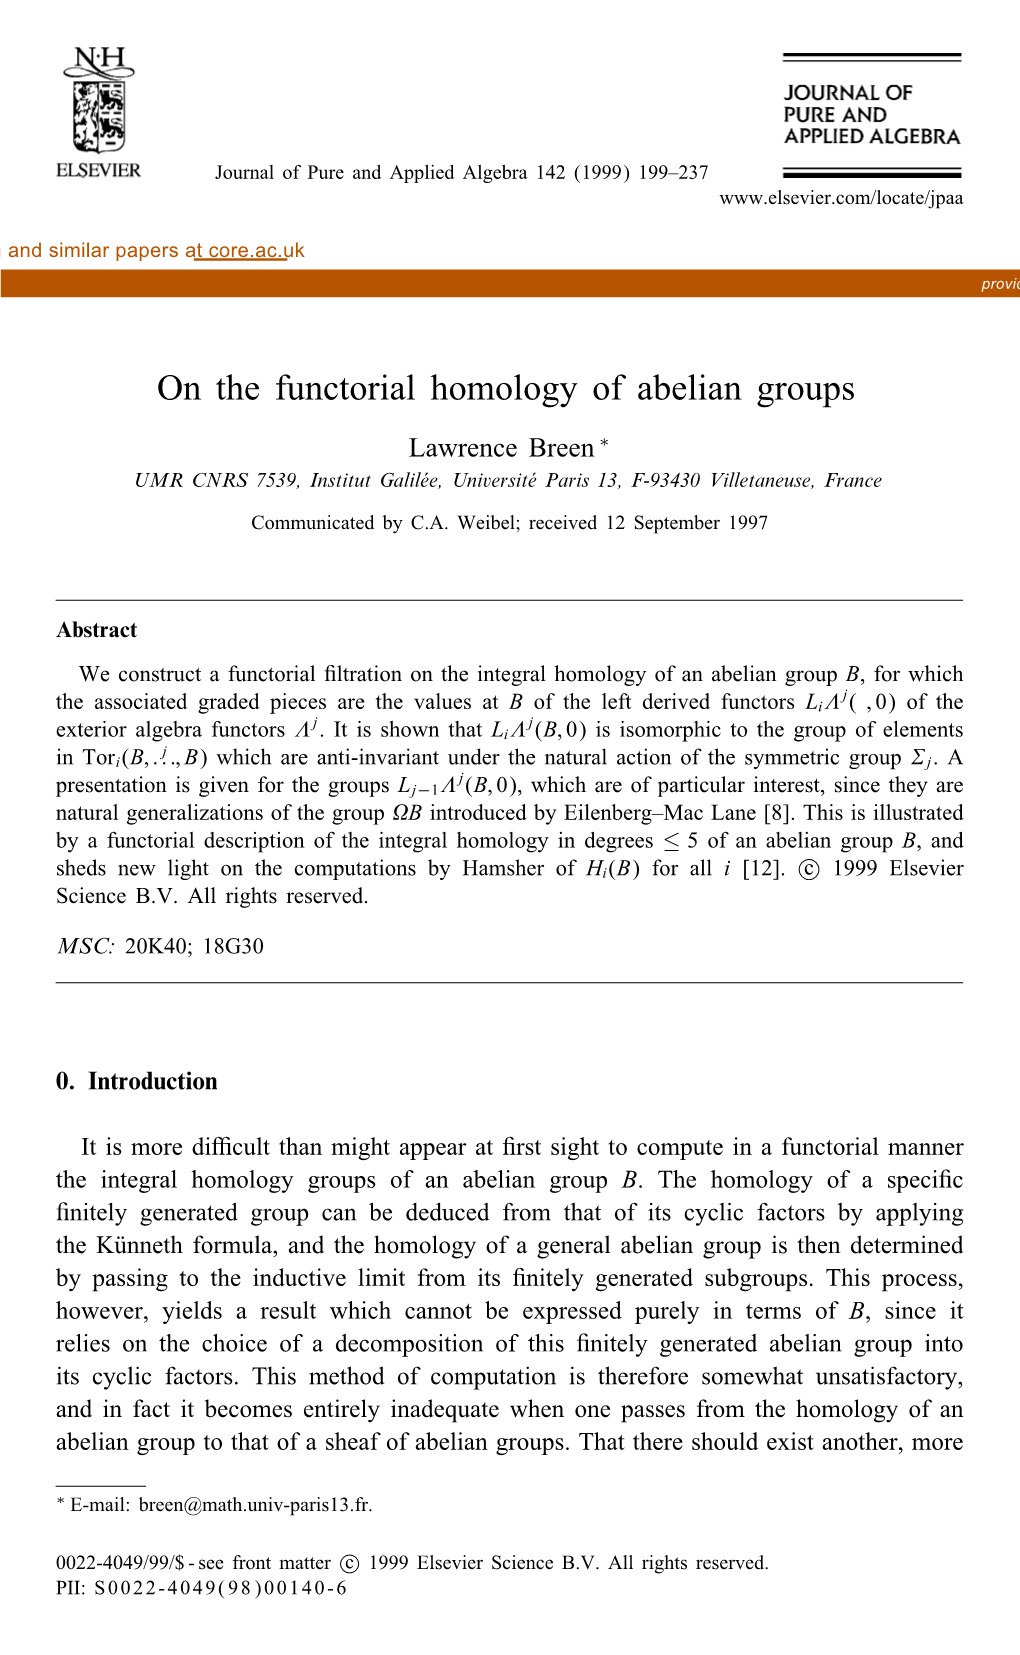 On the Functorial Homology of Abelian Groups